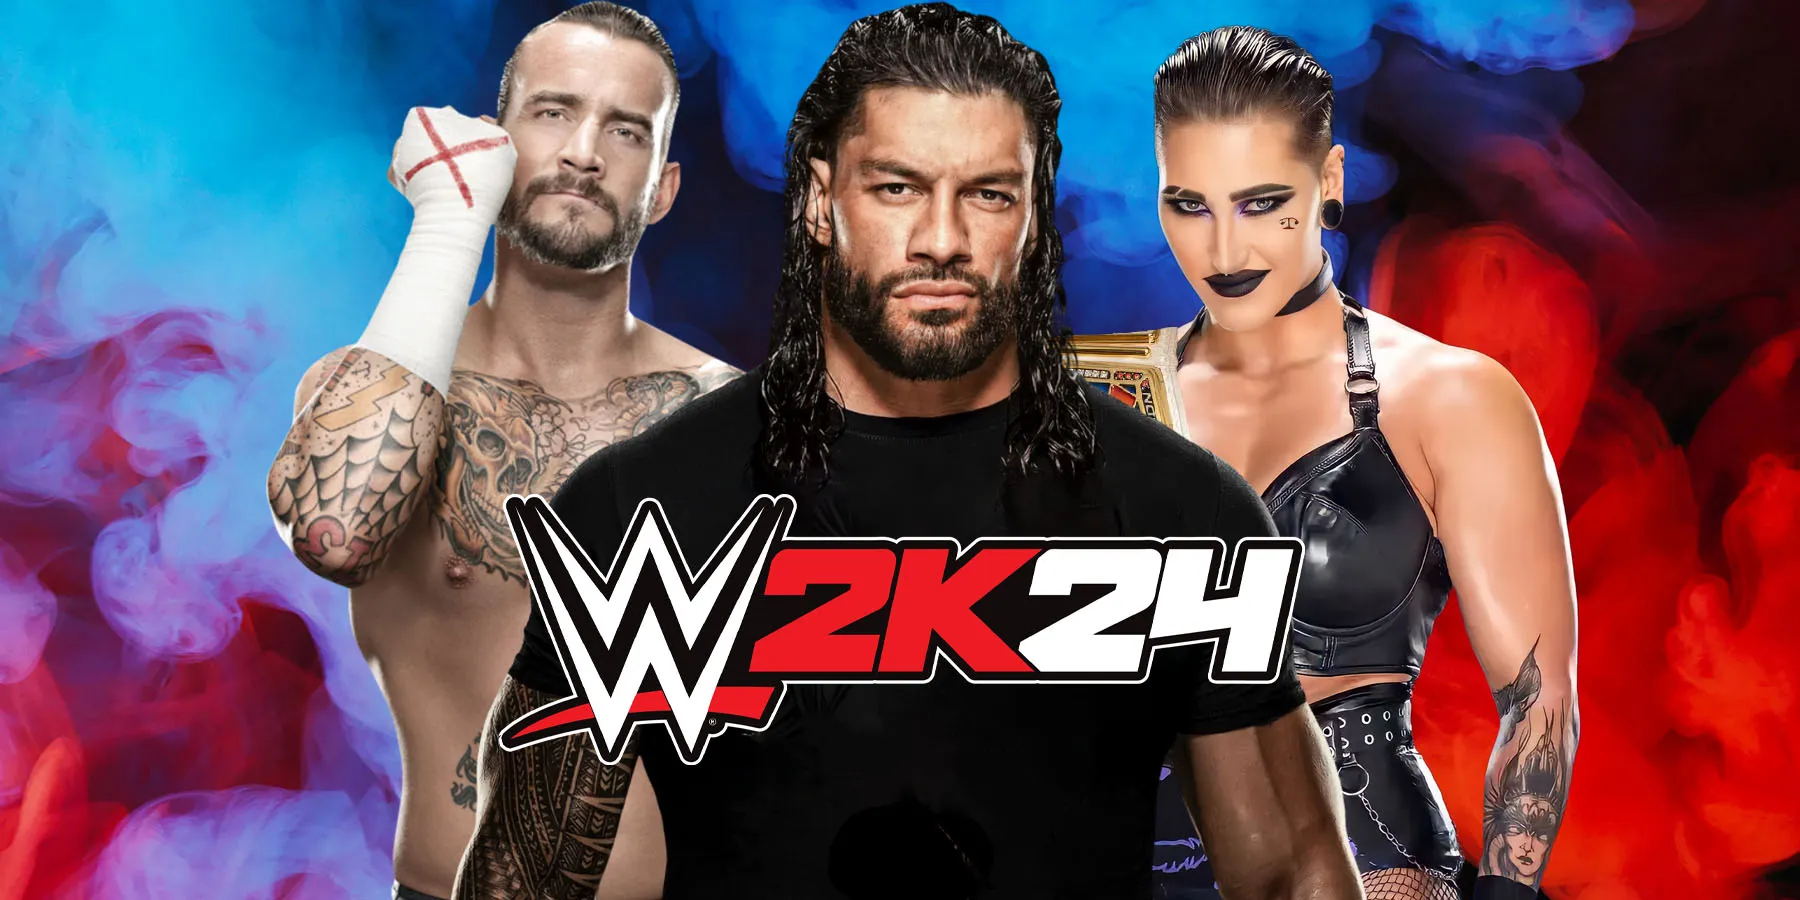 WWE 2K24 Roster LEAKED! Cover Stars, All Superstars, Legends, ECW, NXT Stars, and Everything We